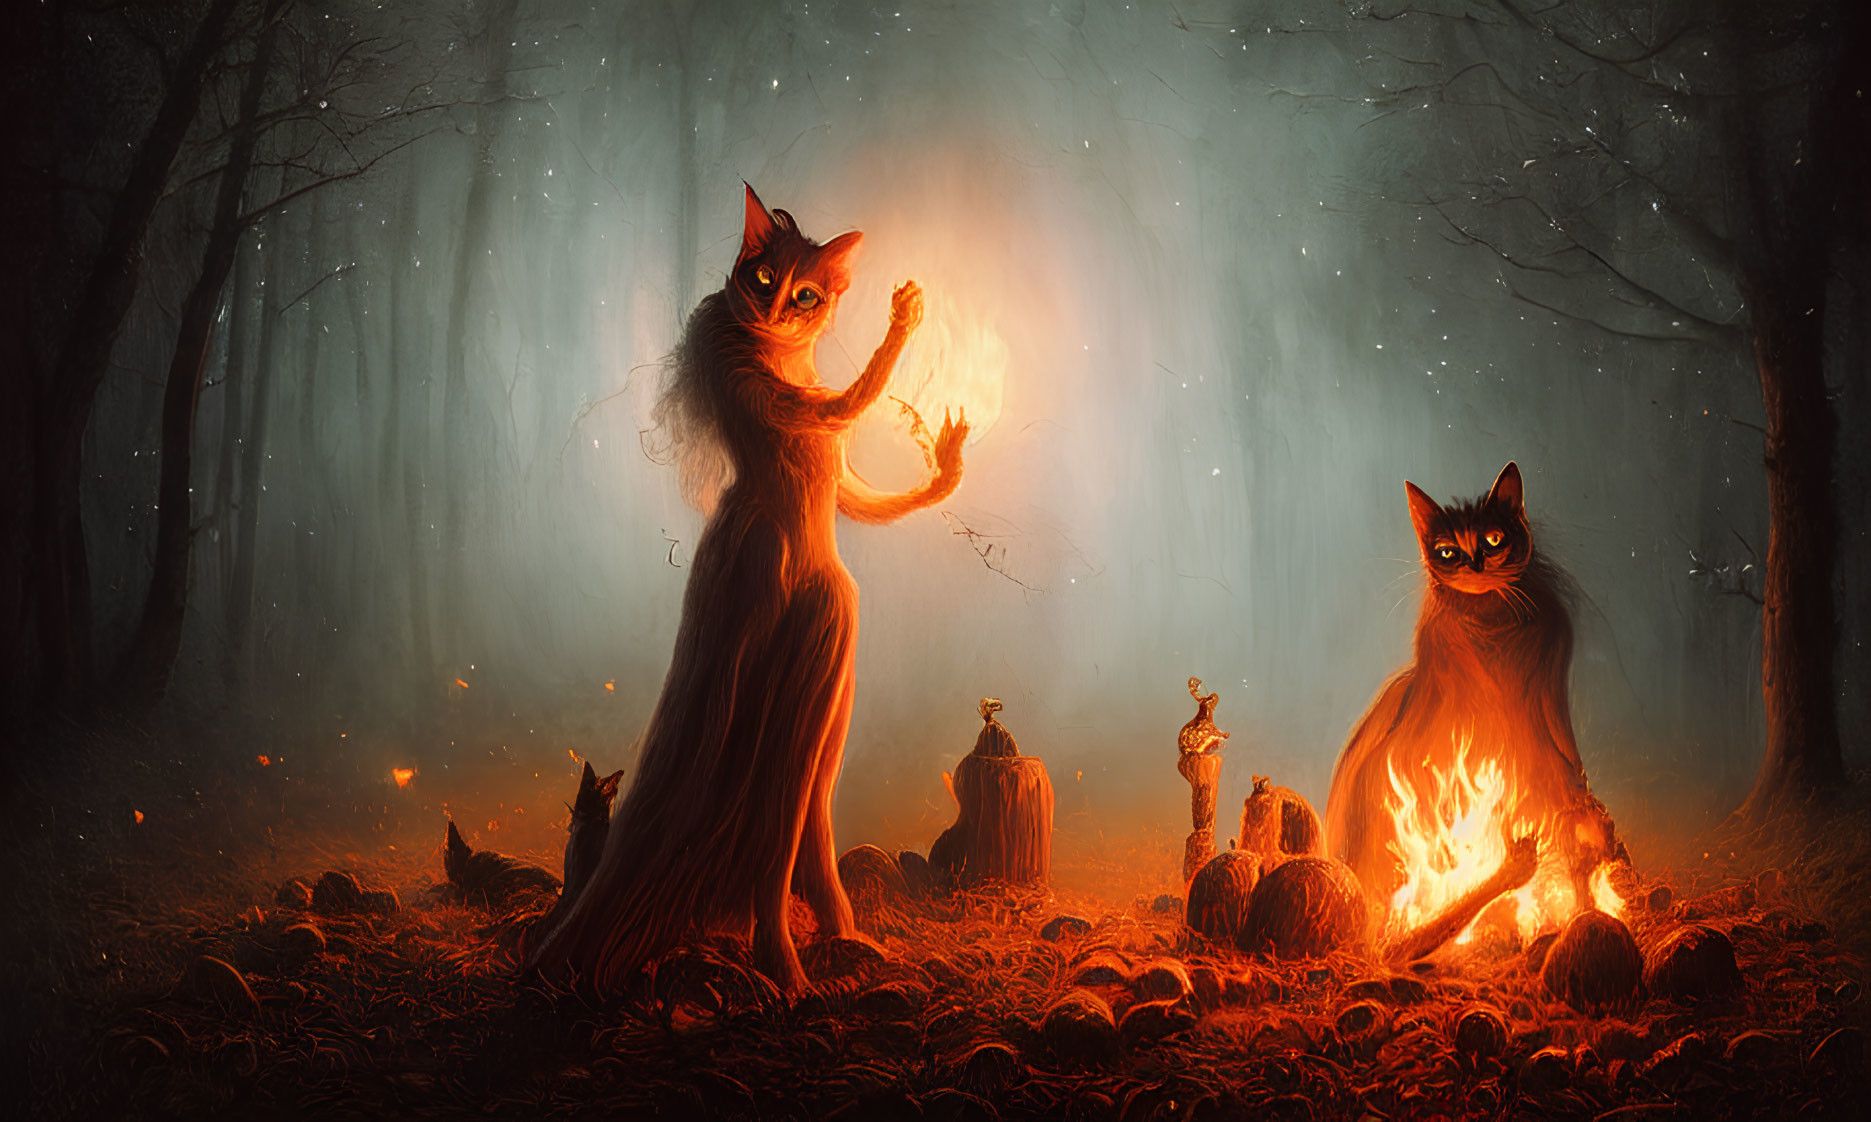 Anthropomorphic foxes in mystical forest with bonfire and smaller companions.